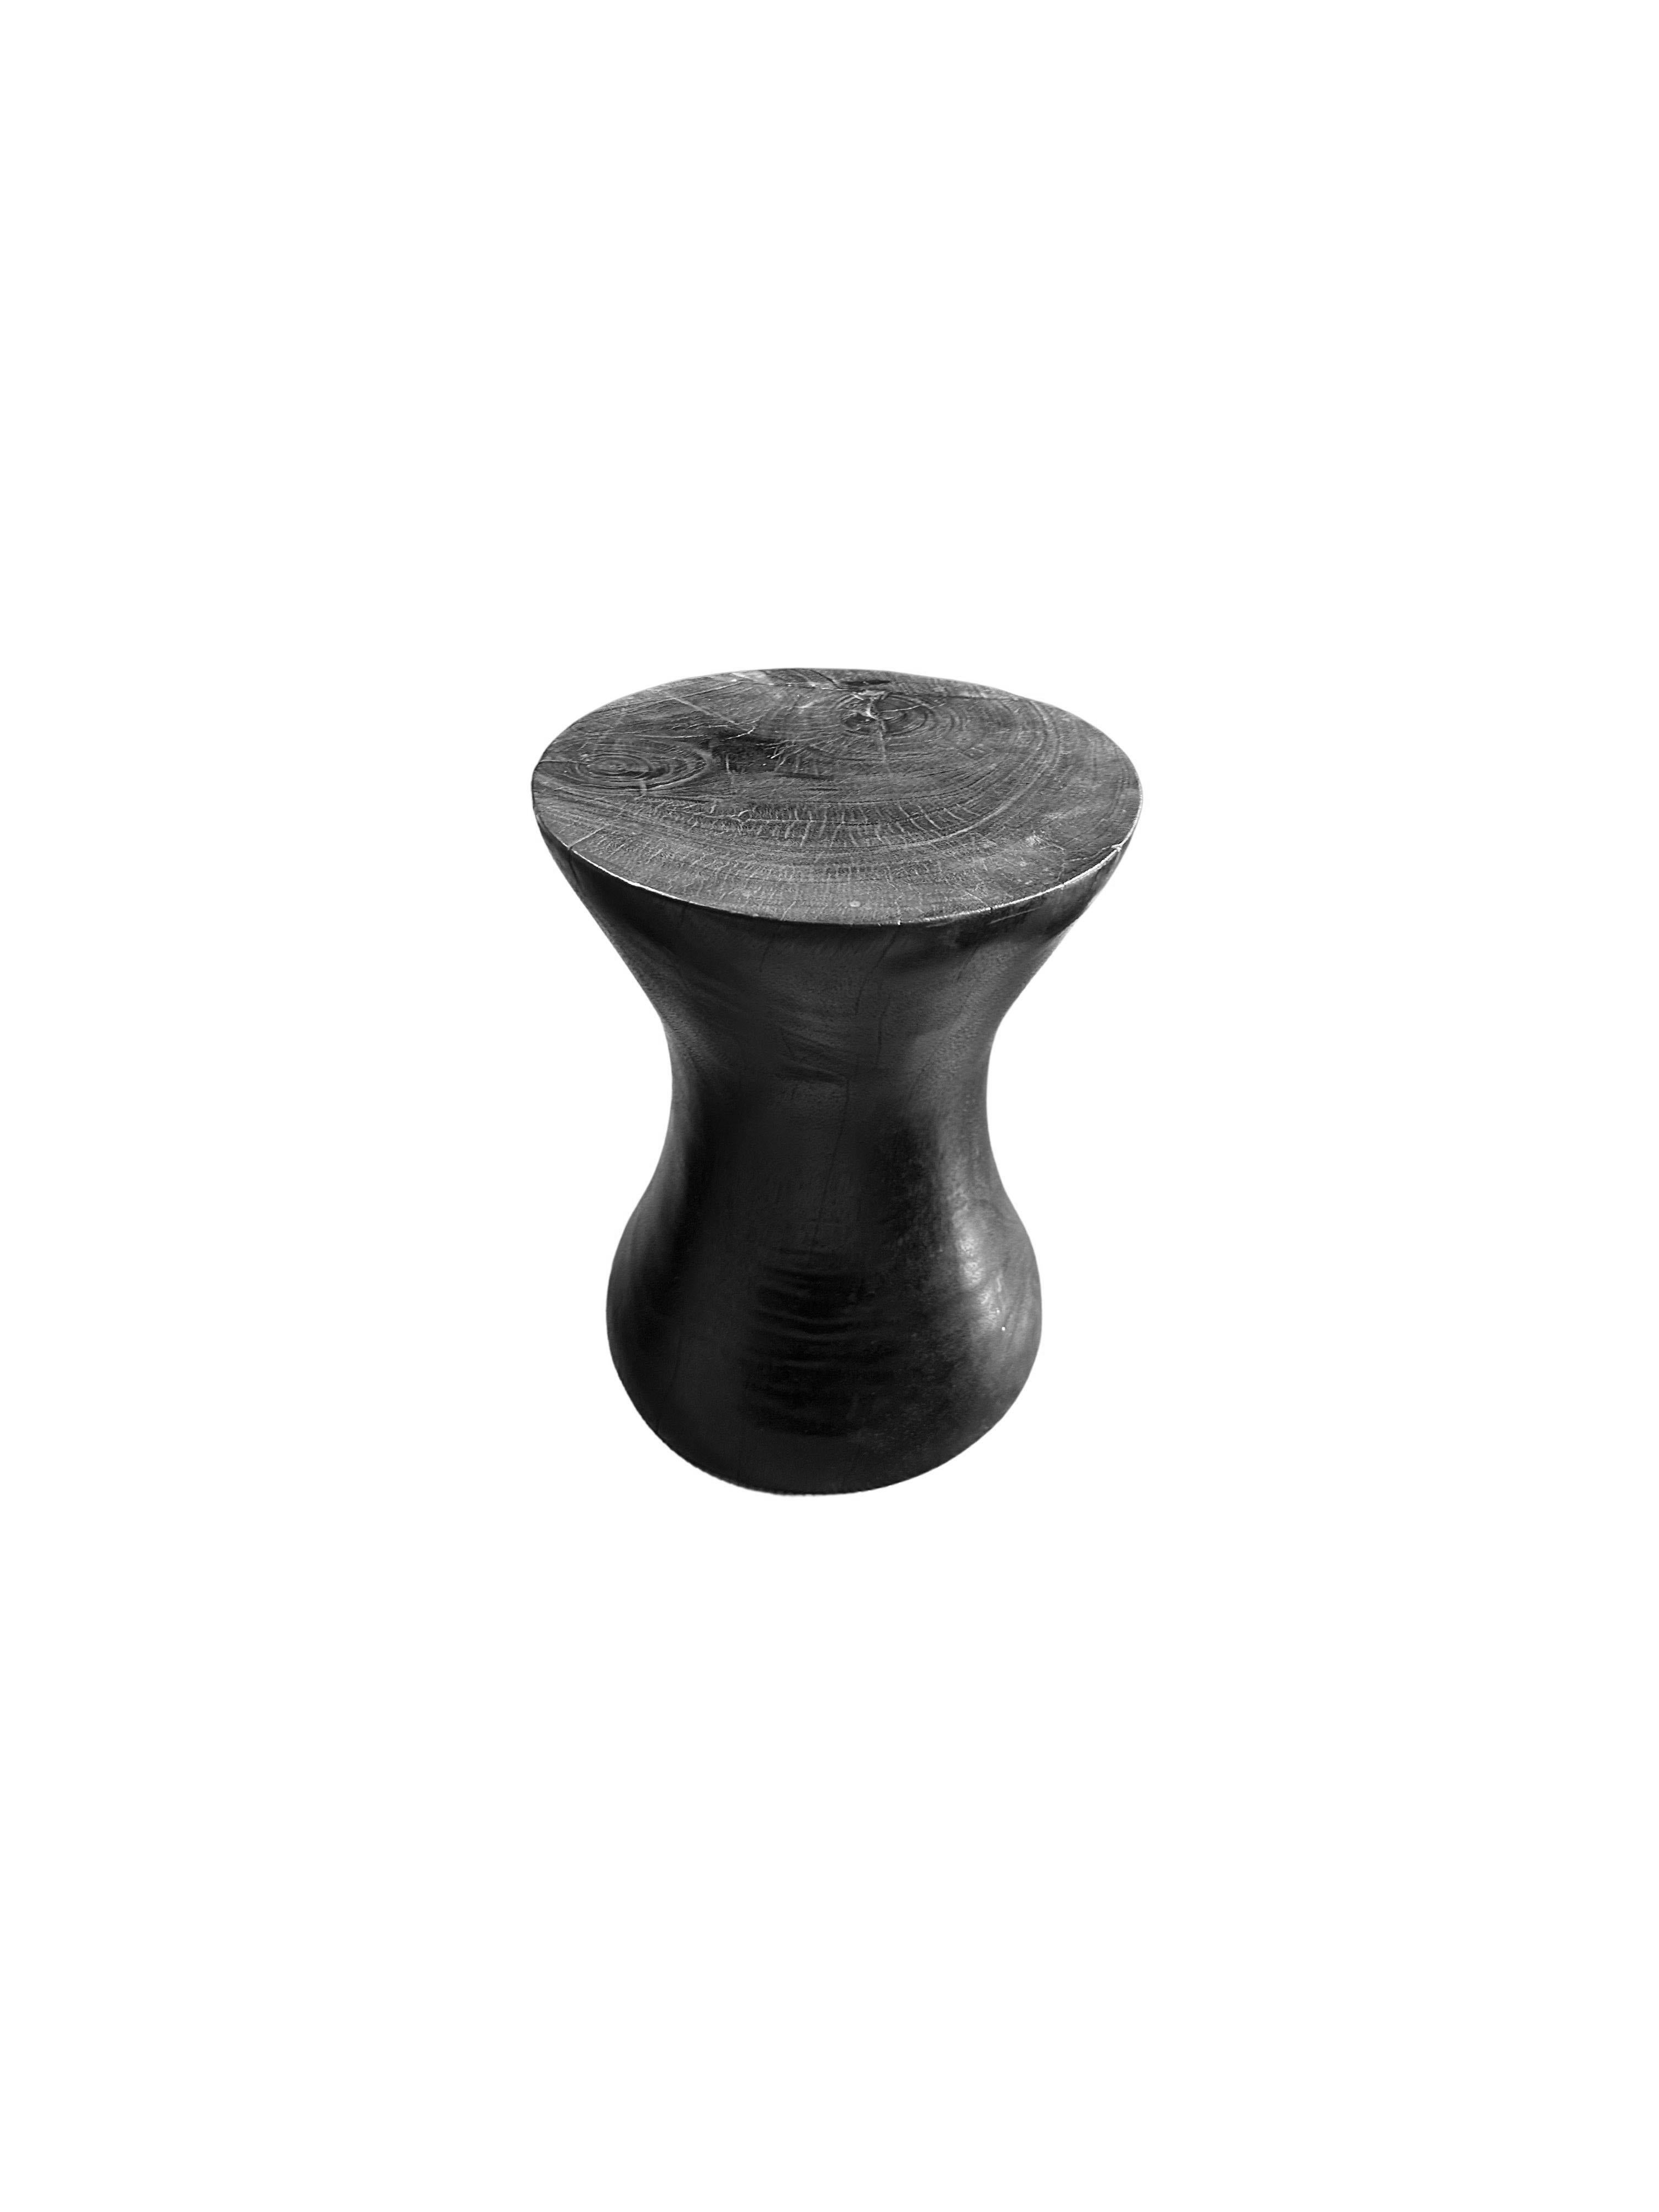 Indonesian Round Mango Wood Side Table, Burnt Finish, Carved Detailing, Modern Organic For Sale